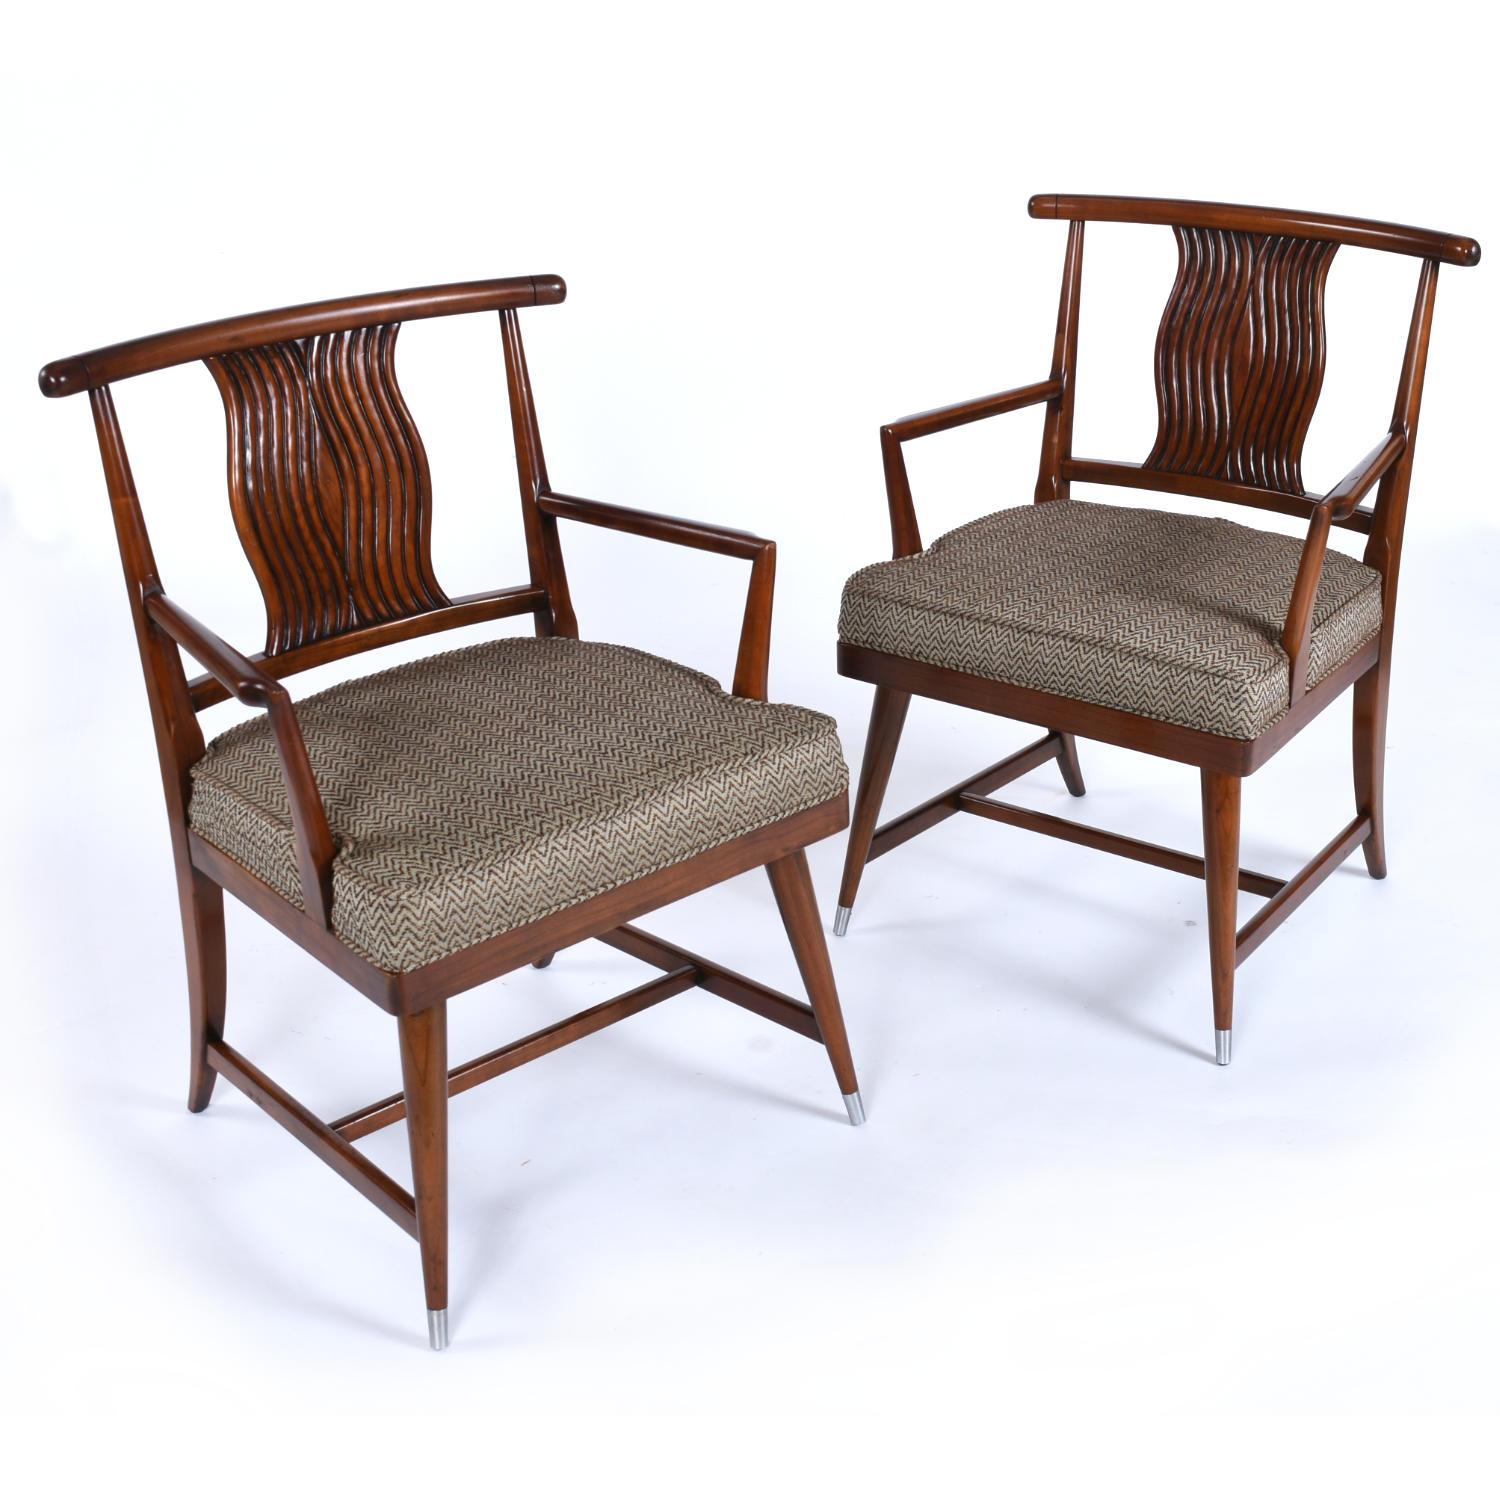 Mid-20th Century Mid-Century Modern Asian Chinoiserie Sabre Leg Walnut Dining Chairs For Sale